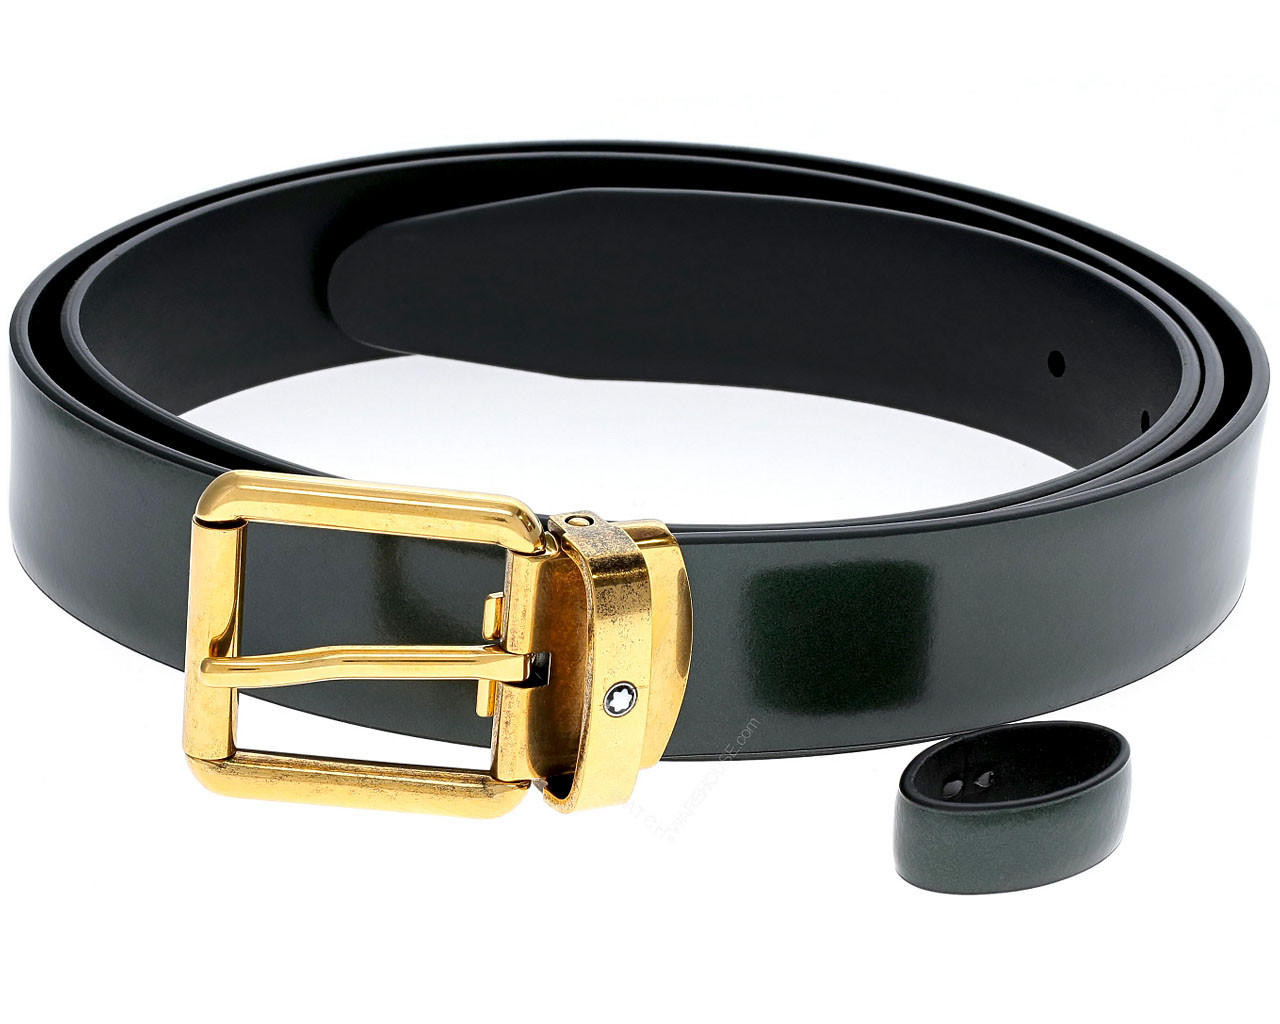 https://cdn11.bigcommerce.com/s-28d61/images/stencil/1280x1280/products/14194/135398/montblanc-accessories-montblanc-gold-buckle-30mm-brushed-green-leather-belt-129454__79584.1681416982.jpg?c=2